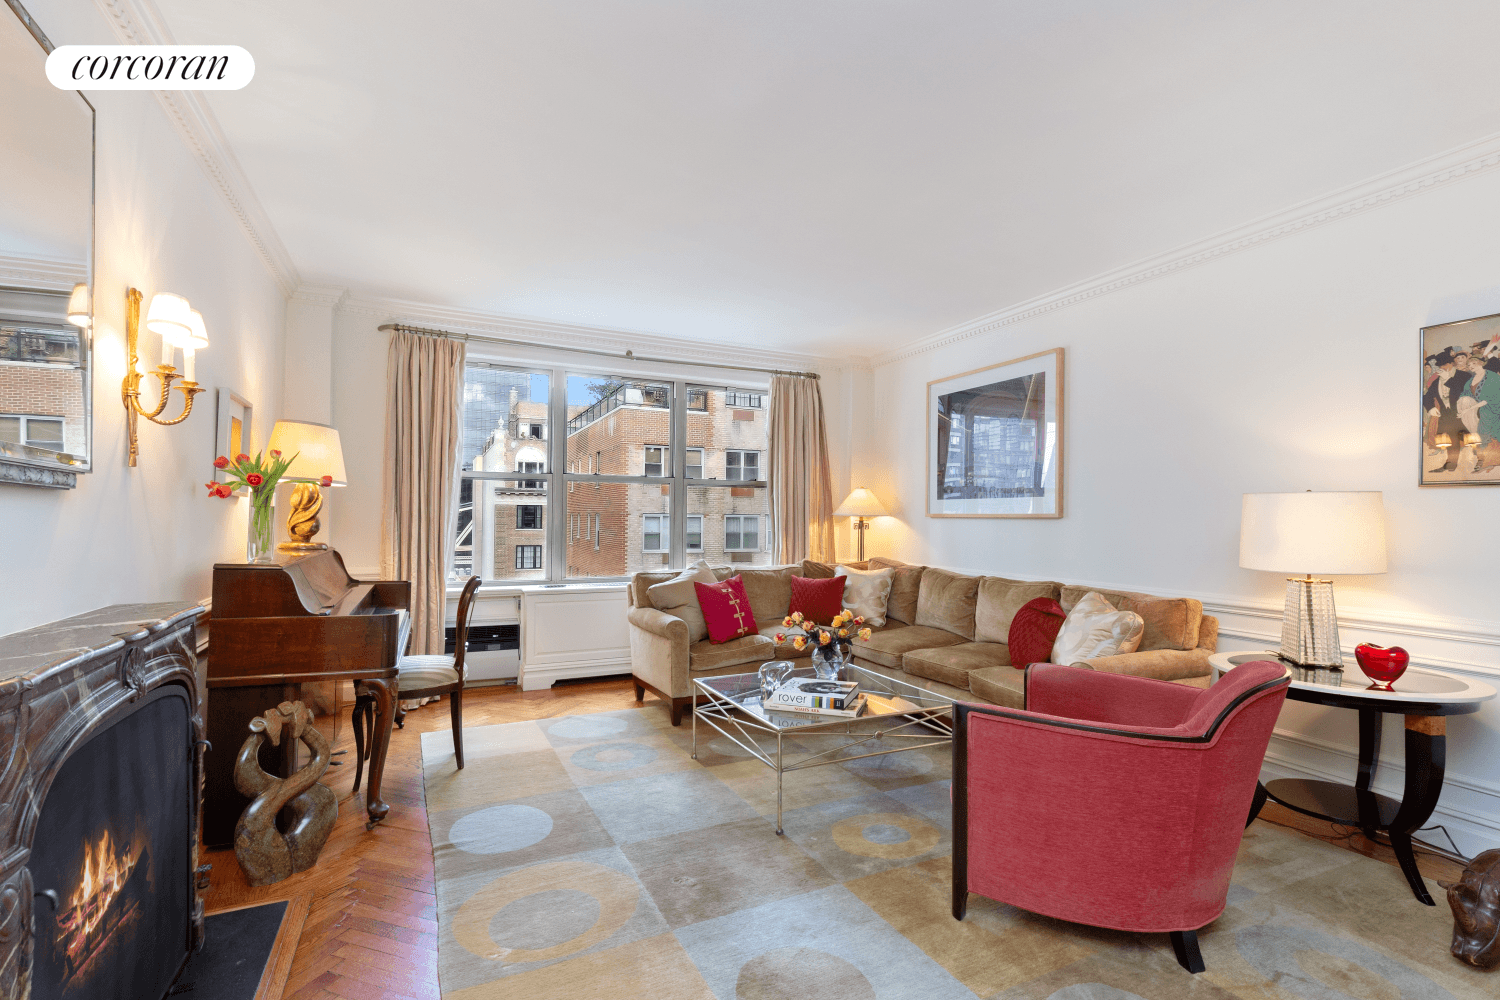 BACK ON THE MARKET. Elegant, Spacious, Prewar Coop Apartment with 3 Bedrooms, 3 Baths, Dining Room, Library and Chef's windowed Kitchen is the perfect home for entertaining.